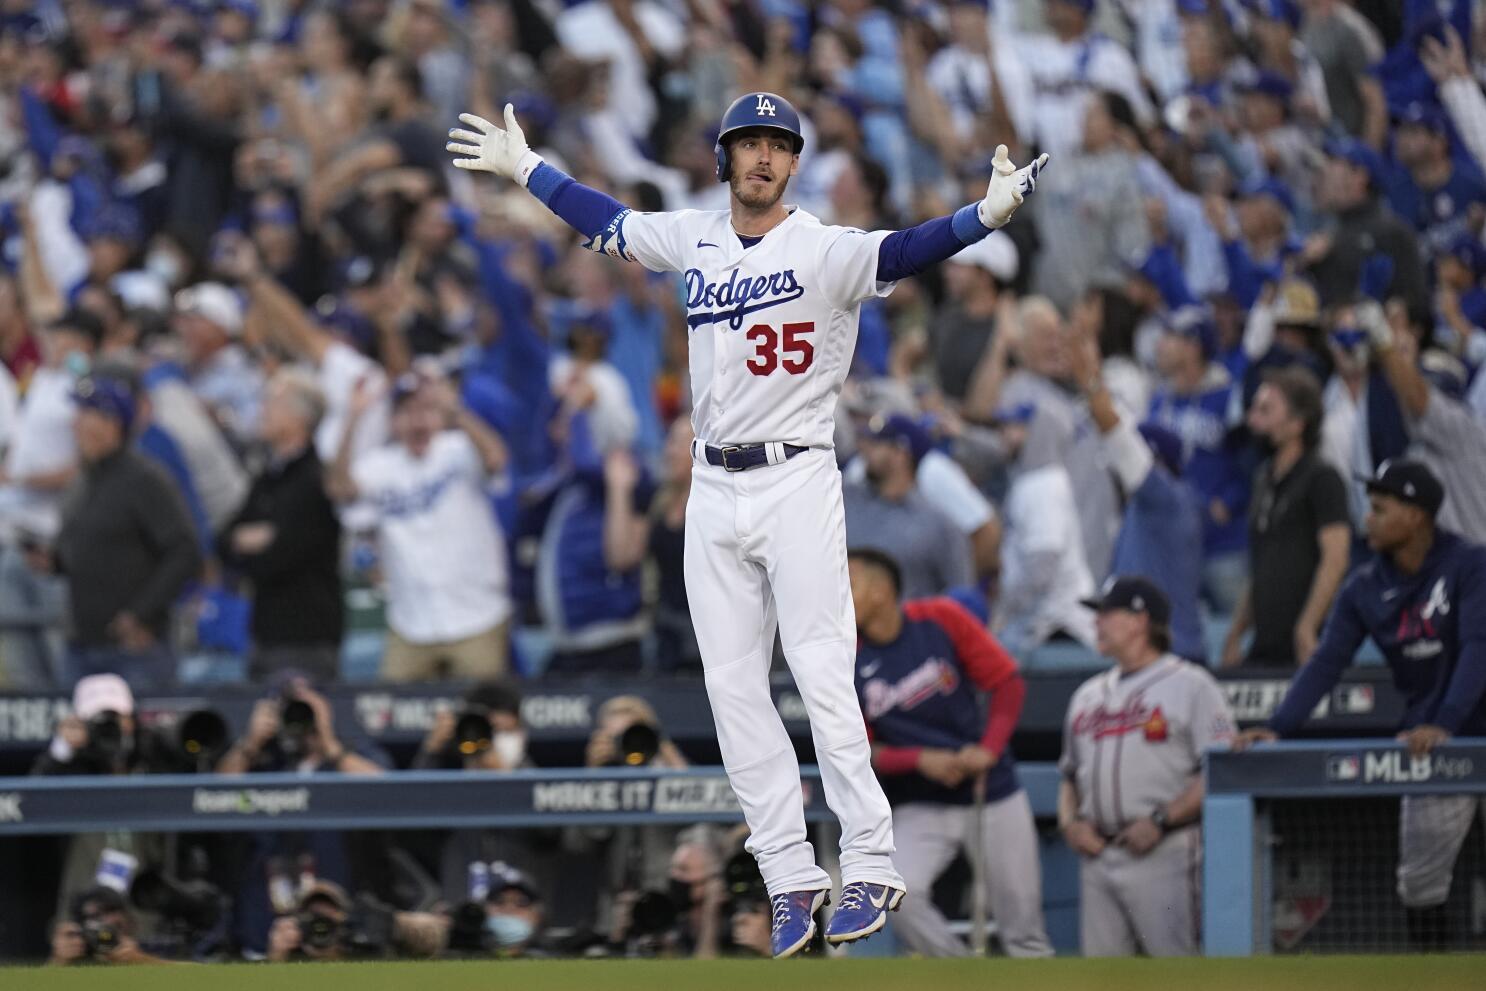 Rosario homers twice, leads Braves to 3-1 NLCS lead over Dodgers